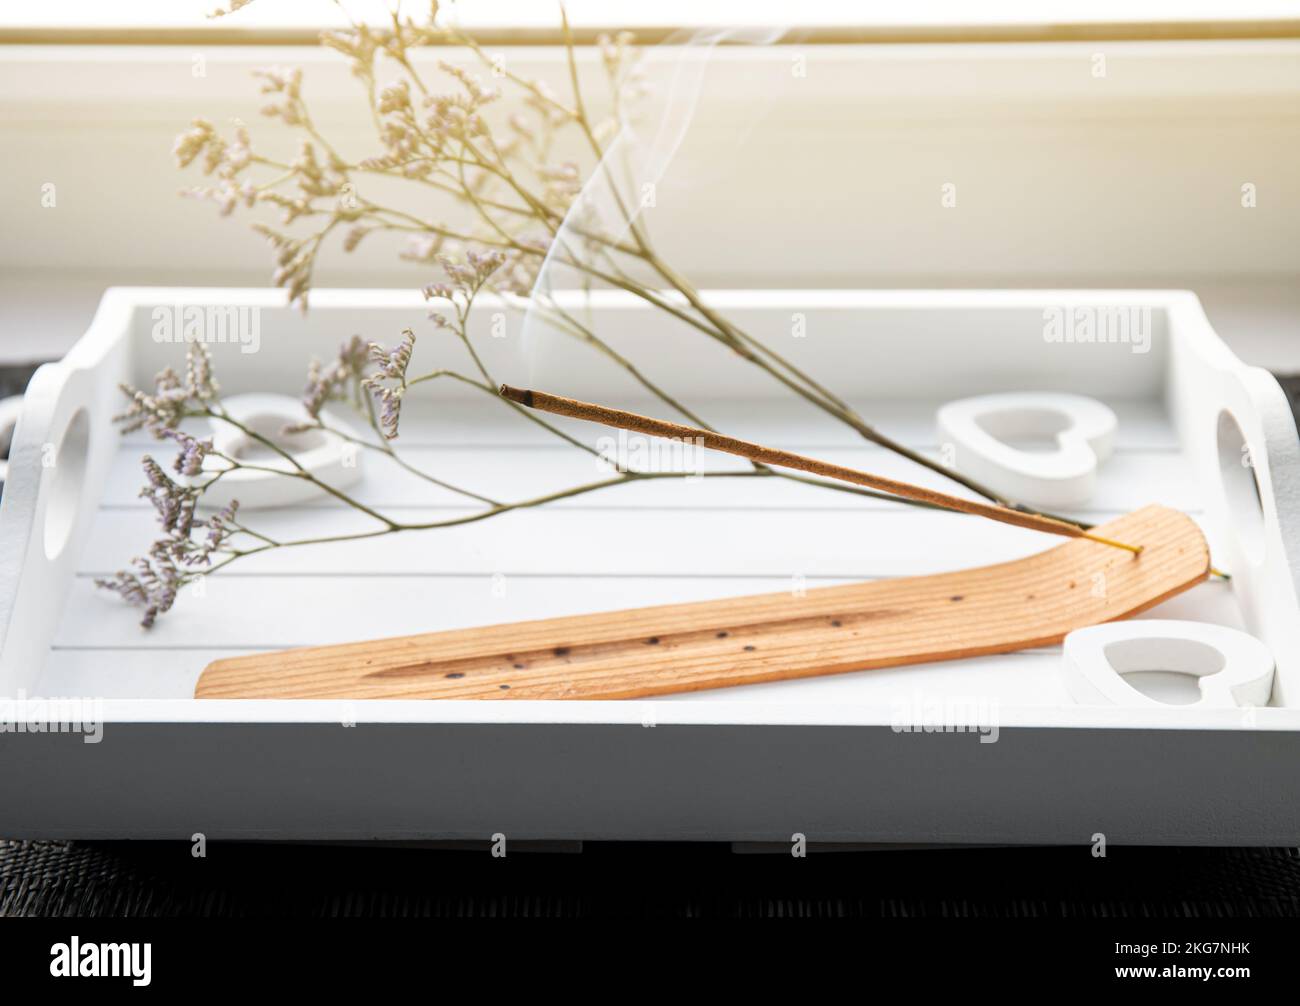 Scent Styling concept. Home window sill with incense candle burning on white minimal tray, create good mood with good pleasant scent. Stock Photo